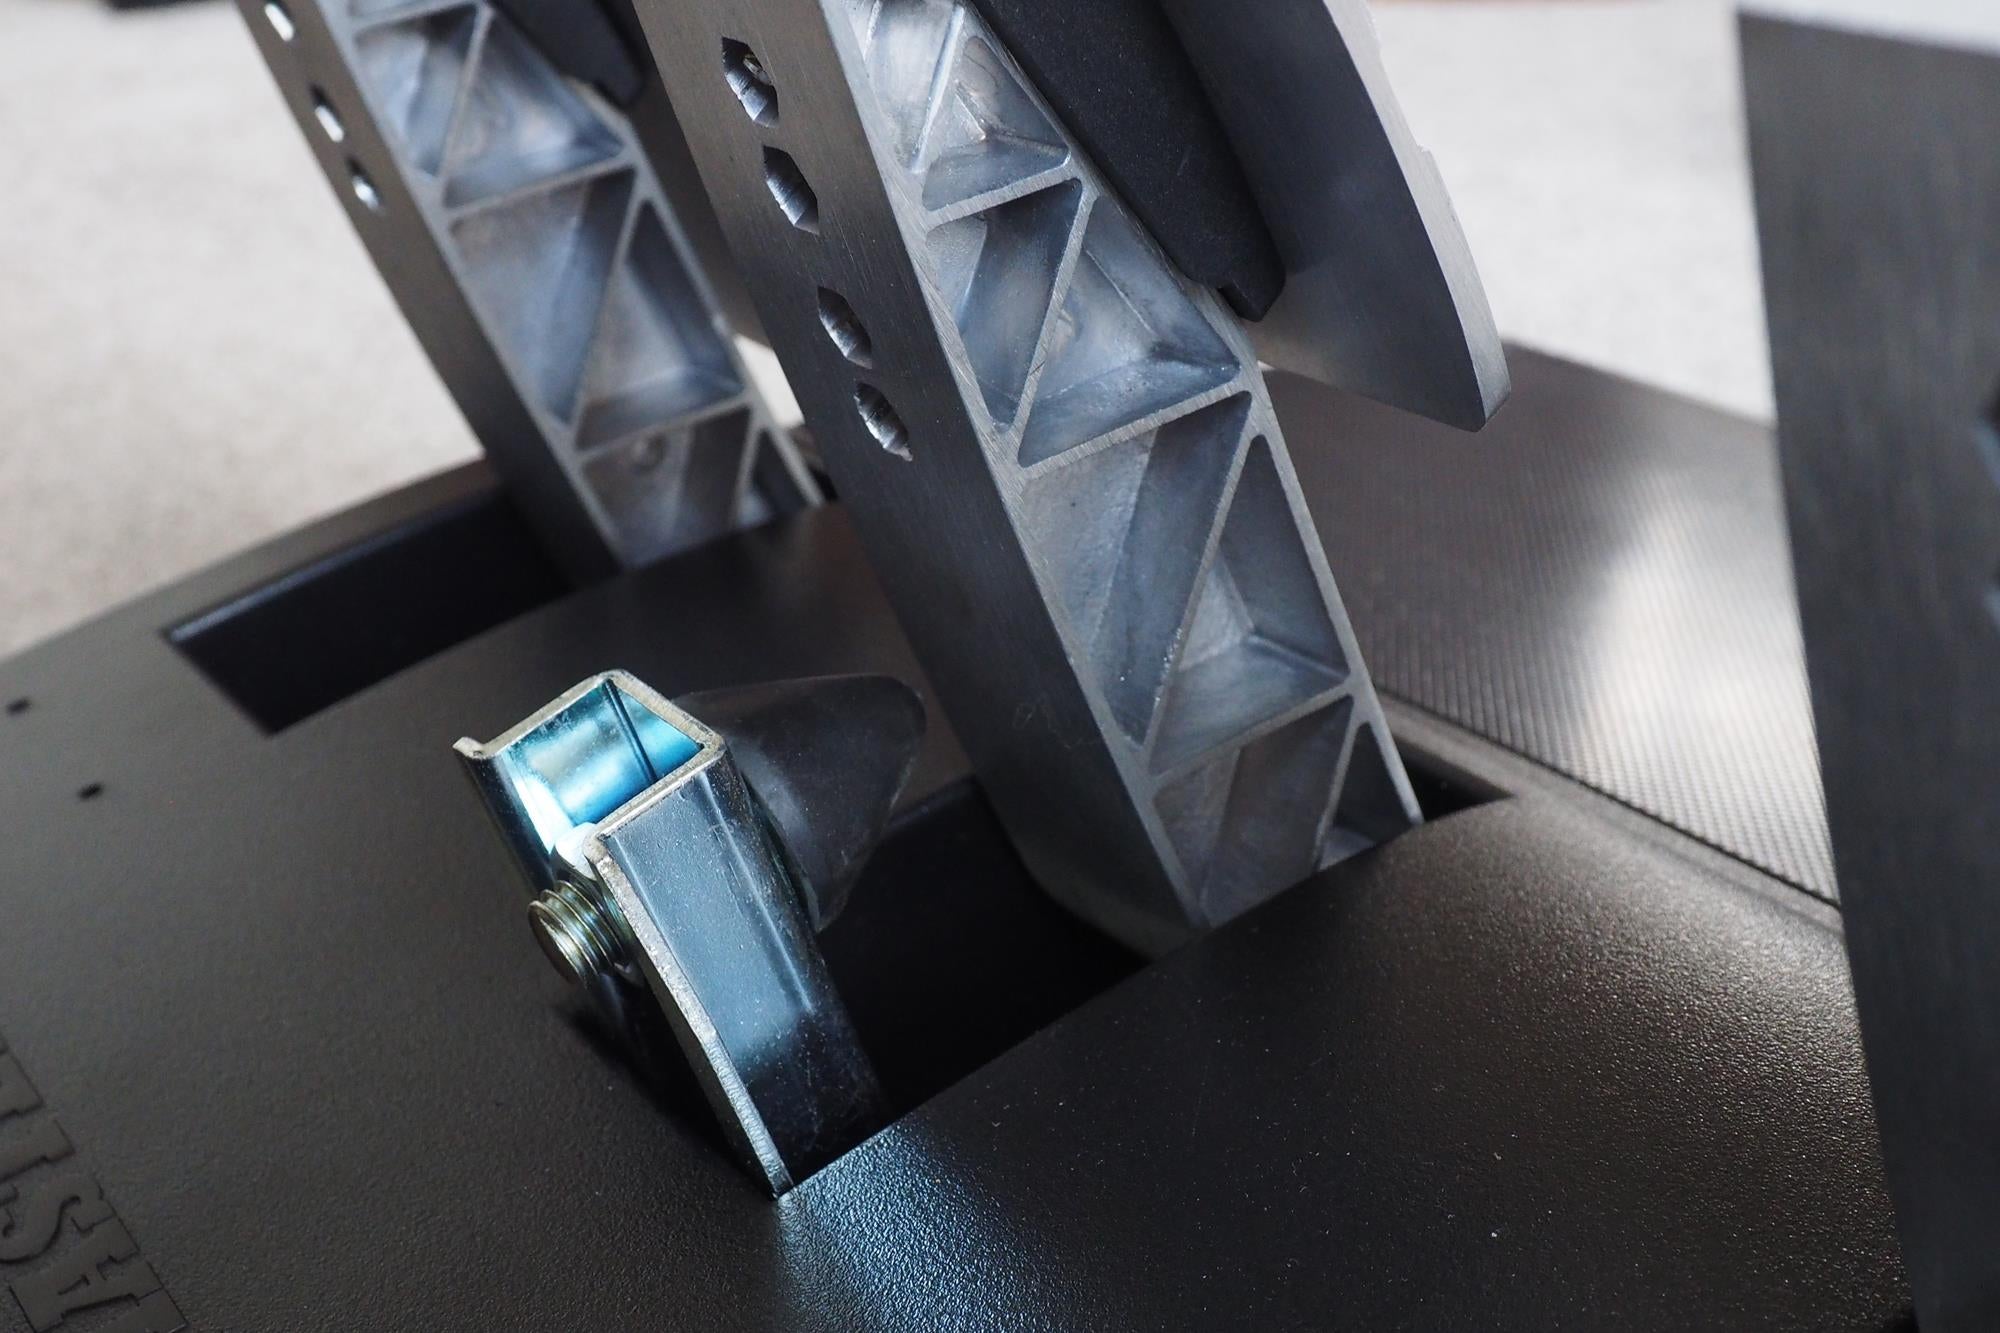 Close-up of Thrustmaster T-GT racing simulator pedals.